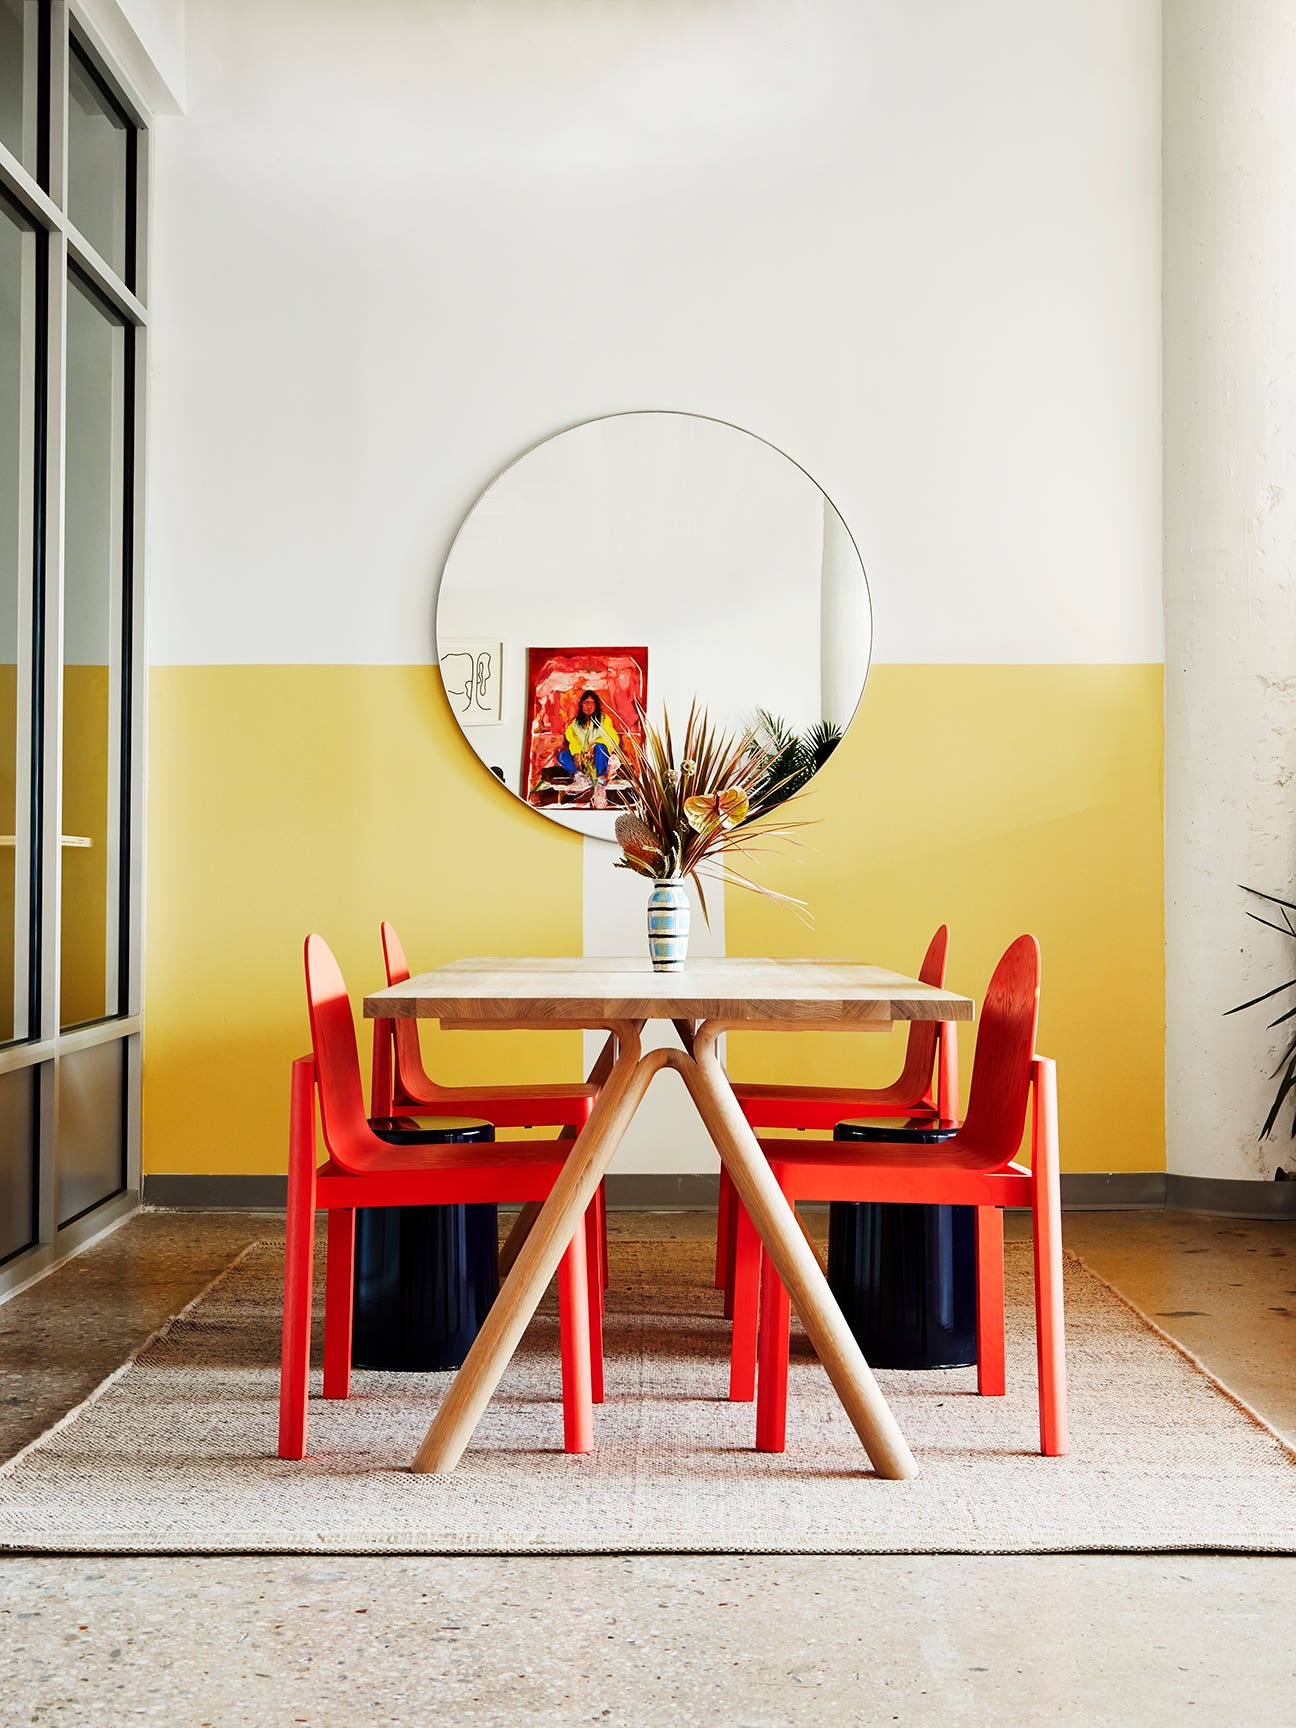 Dining area with red chairs